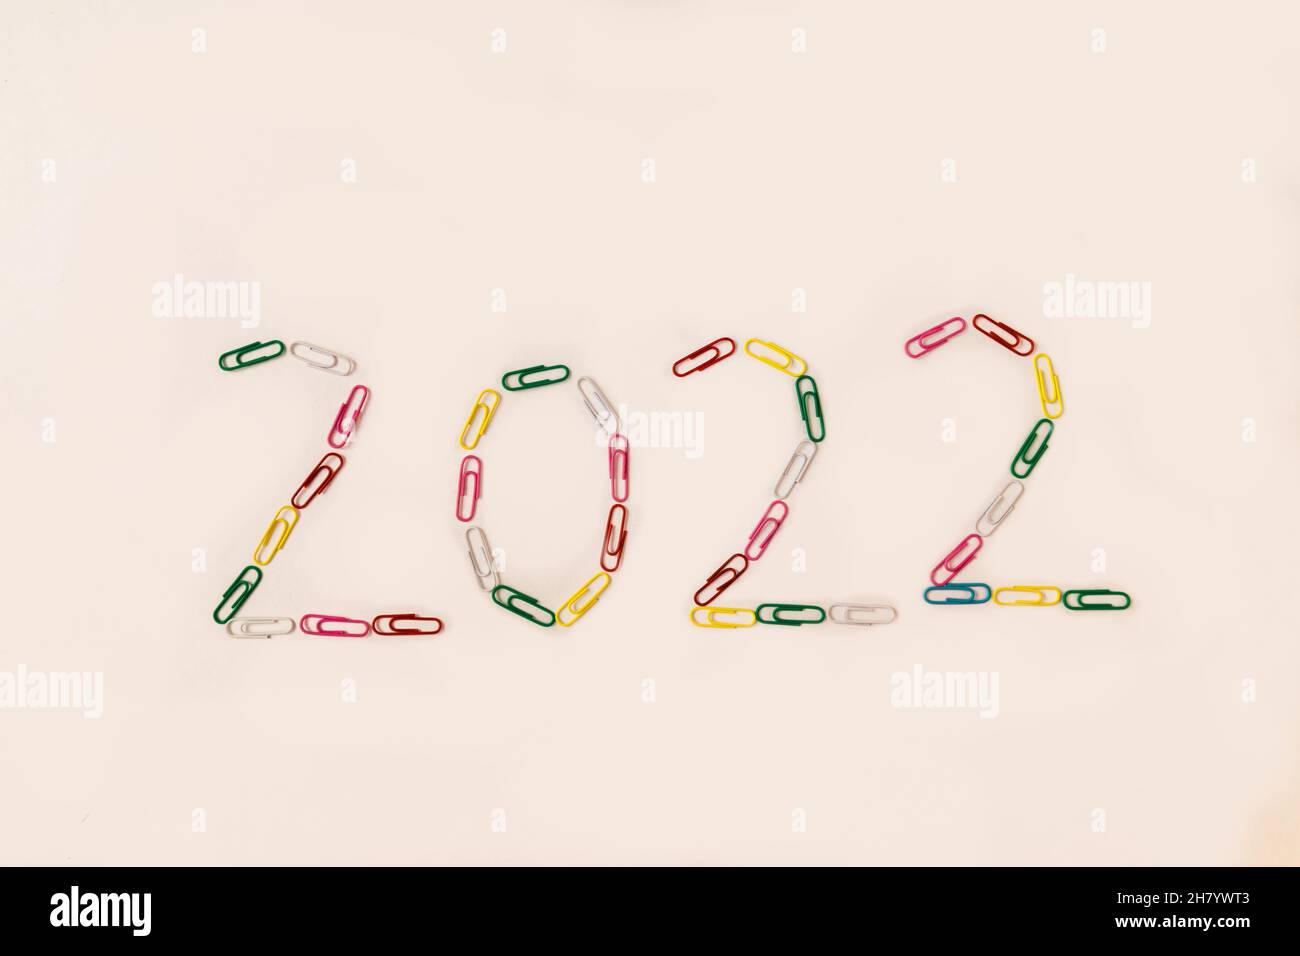 Number 2022 is laid out of multicolored paper clips on a white background.  Stock Photo